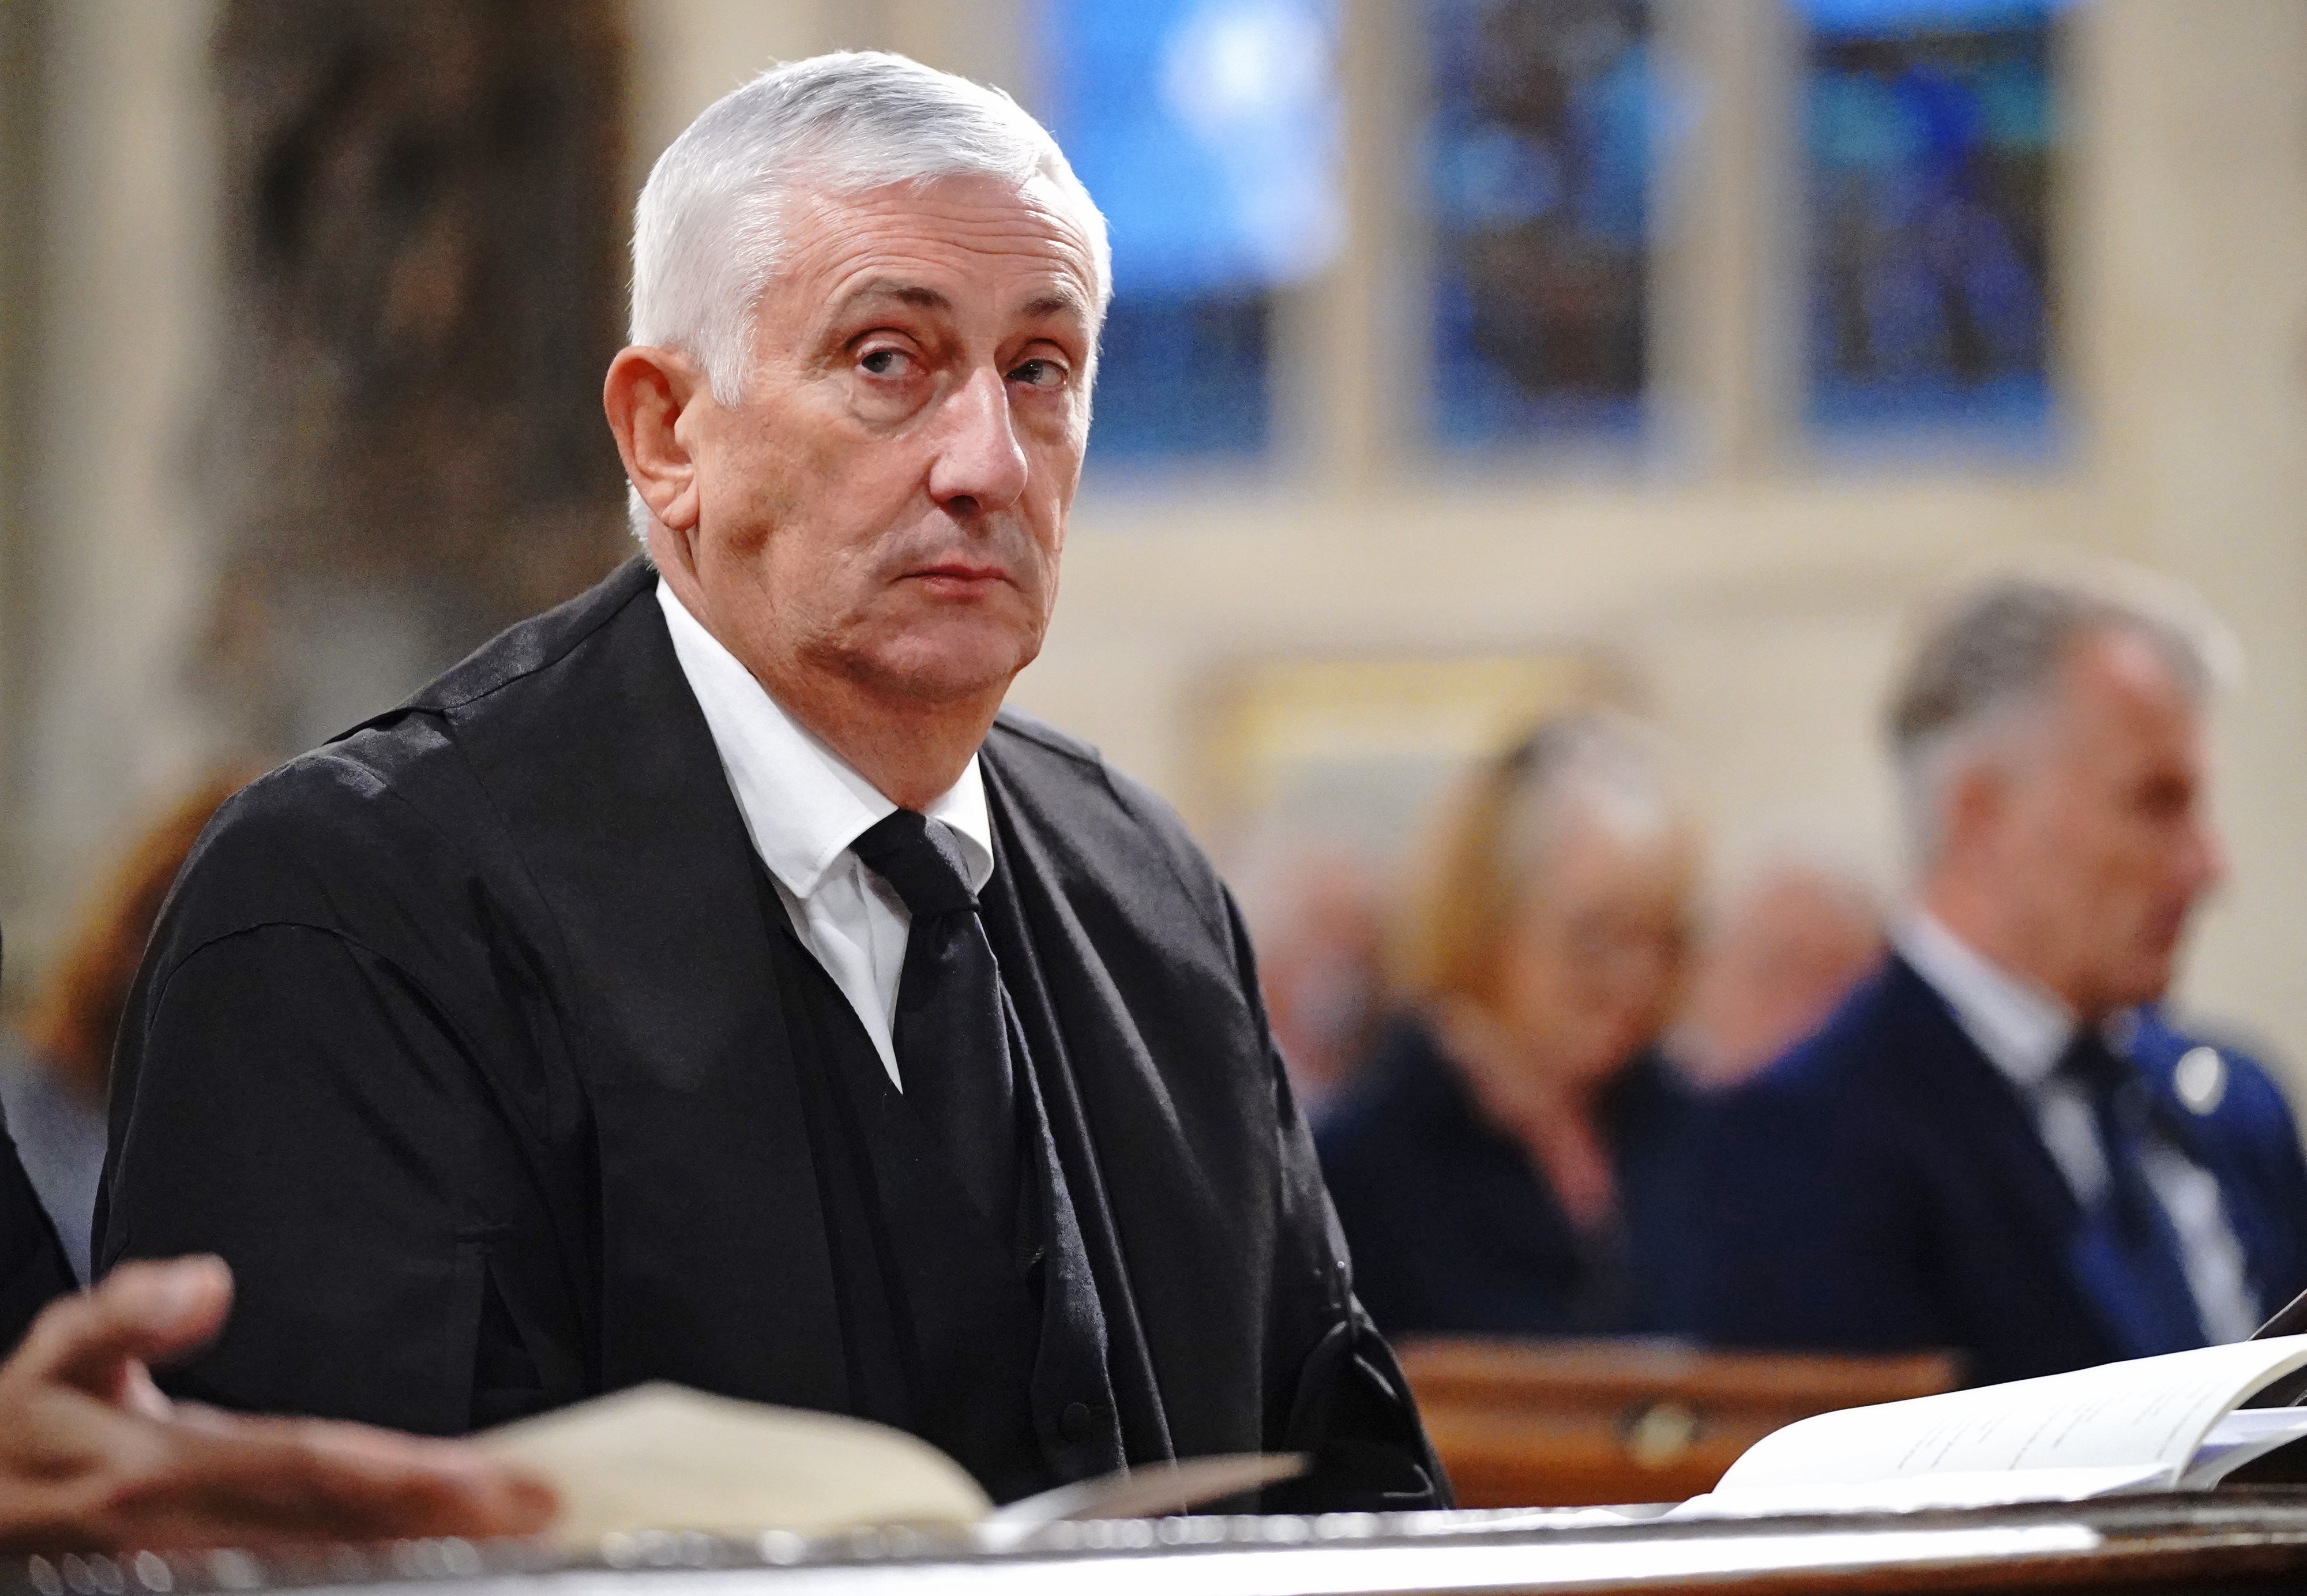 Sir Lindsay Hoyle is set to speak to Government officials (Jonathan Brady/PA)